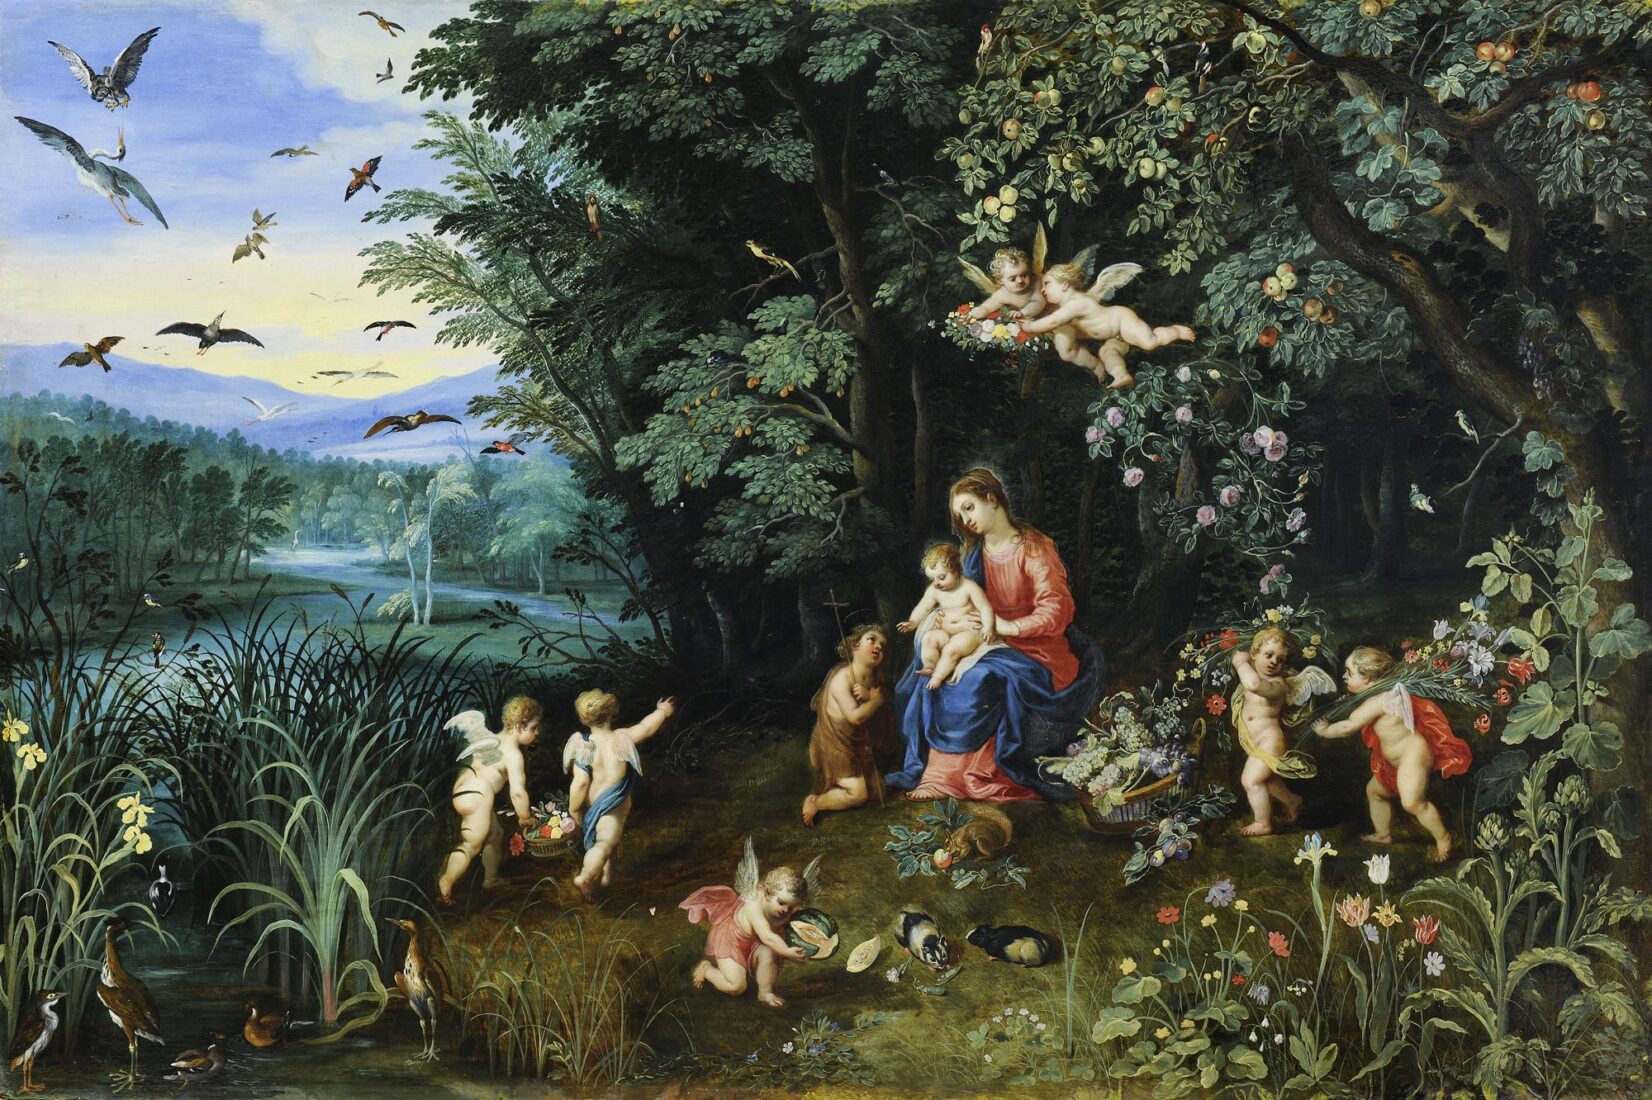 The Virgin Mary with Infant and St. John in a Landscape